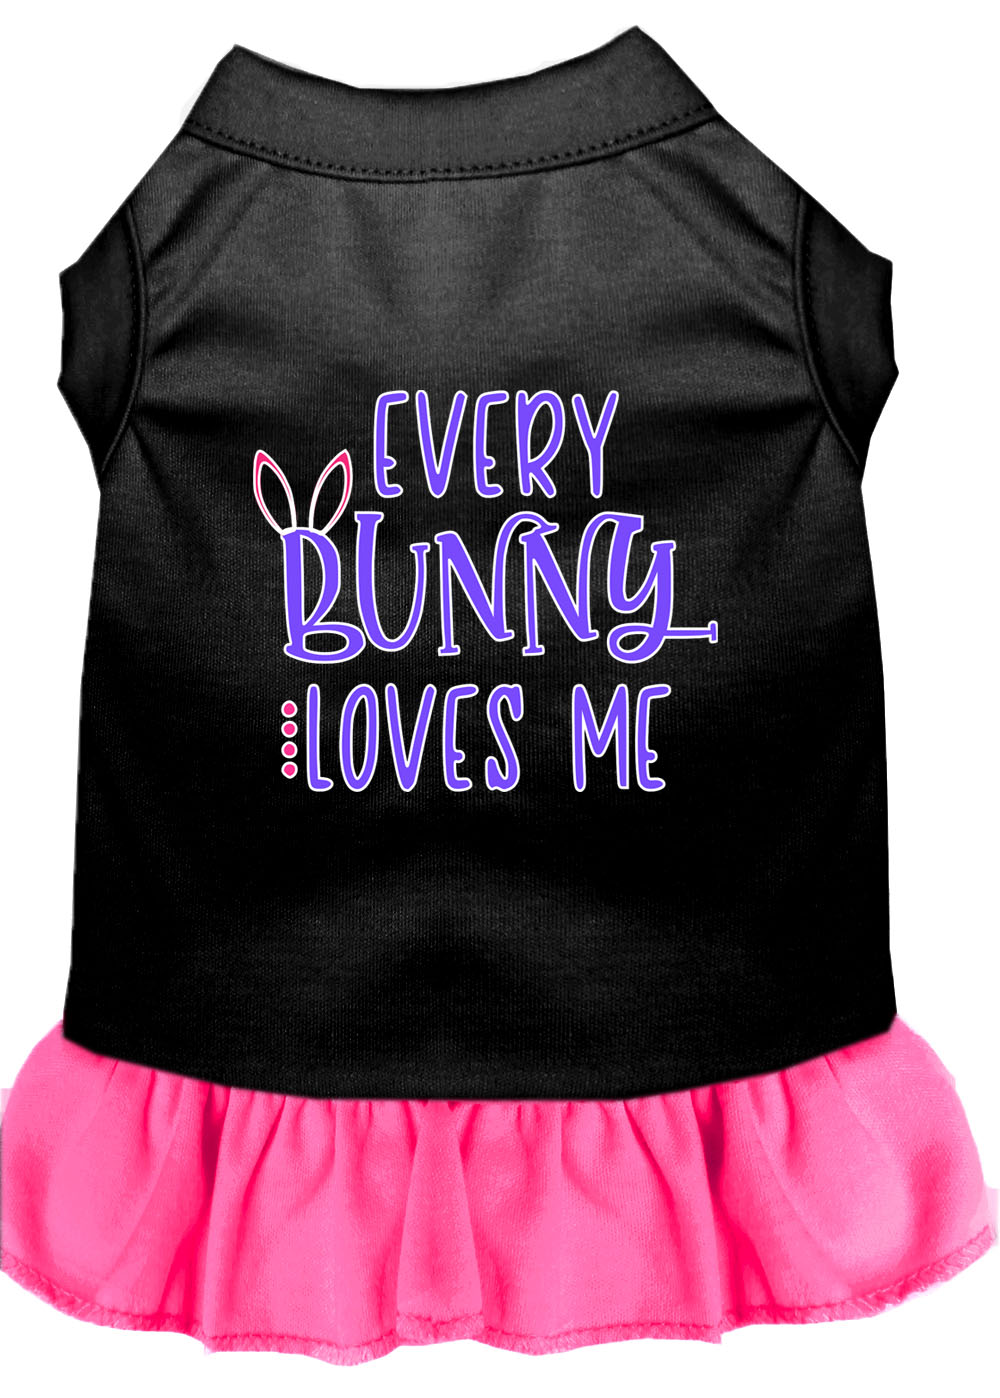 Every Bunny Loves me Screen Print Dog Dress Black with Bright Pink XXL